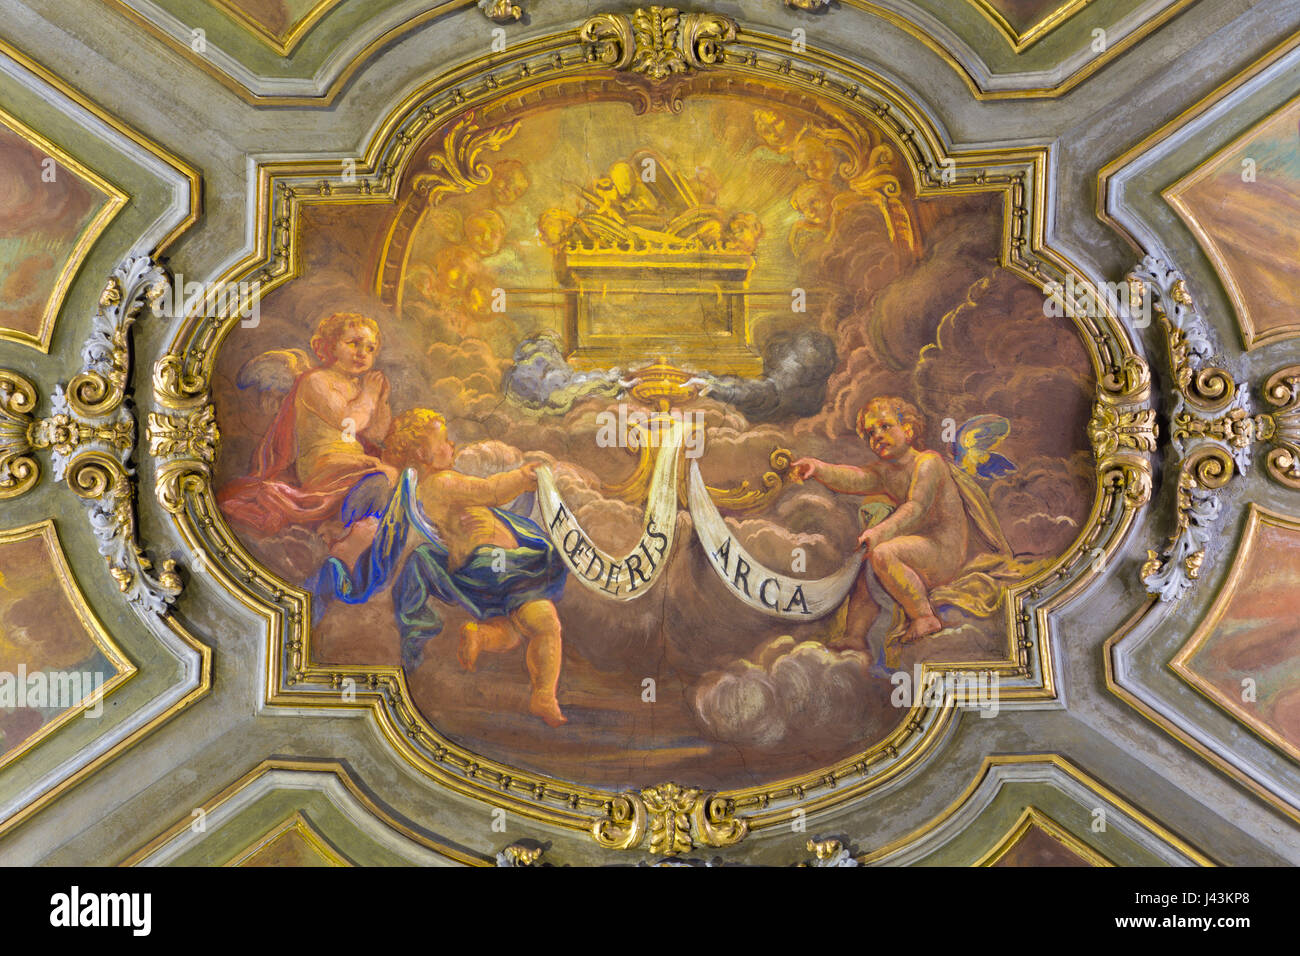 TURIN, ITALY - MARCH 14, 2017: The ceiling fresco of angels with marianic inscription of litany and the Ark of the Covernant in church Chiesa di San F Stock Photo